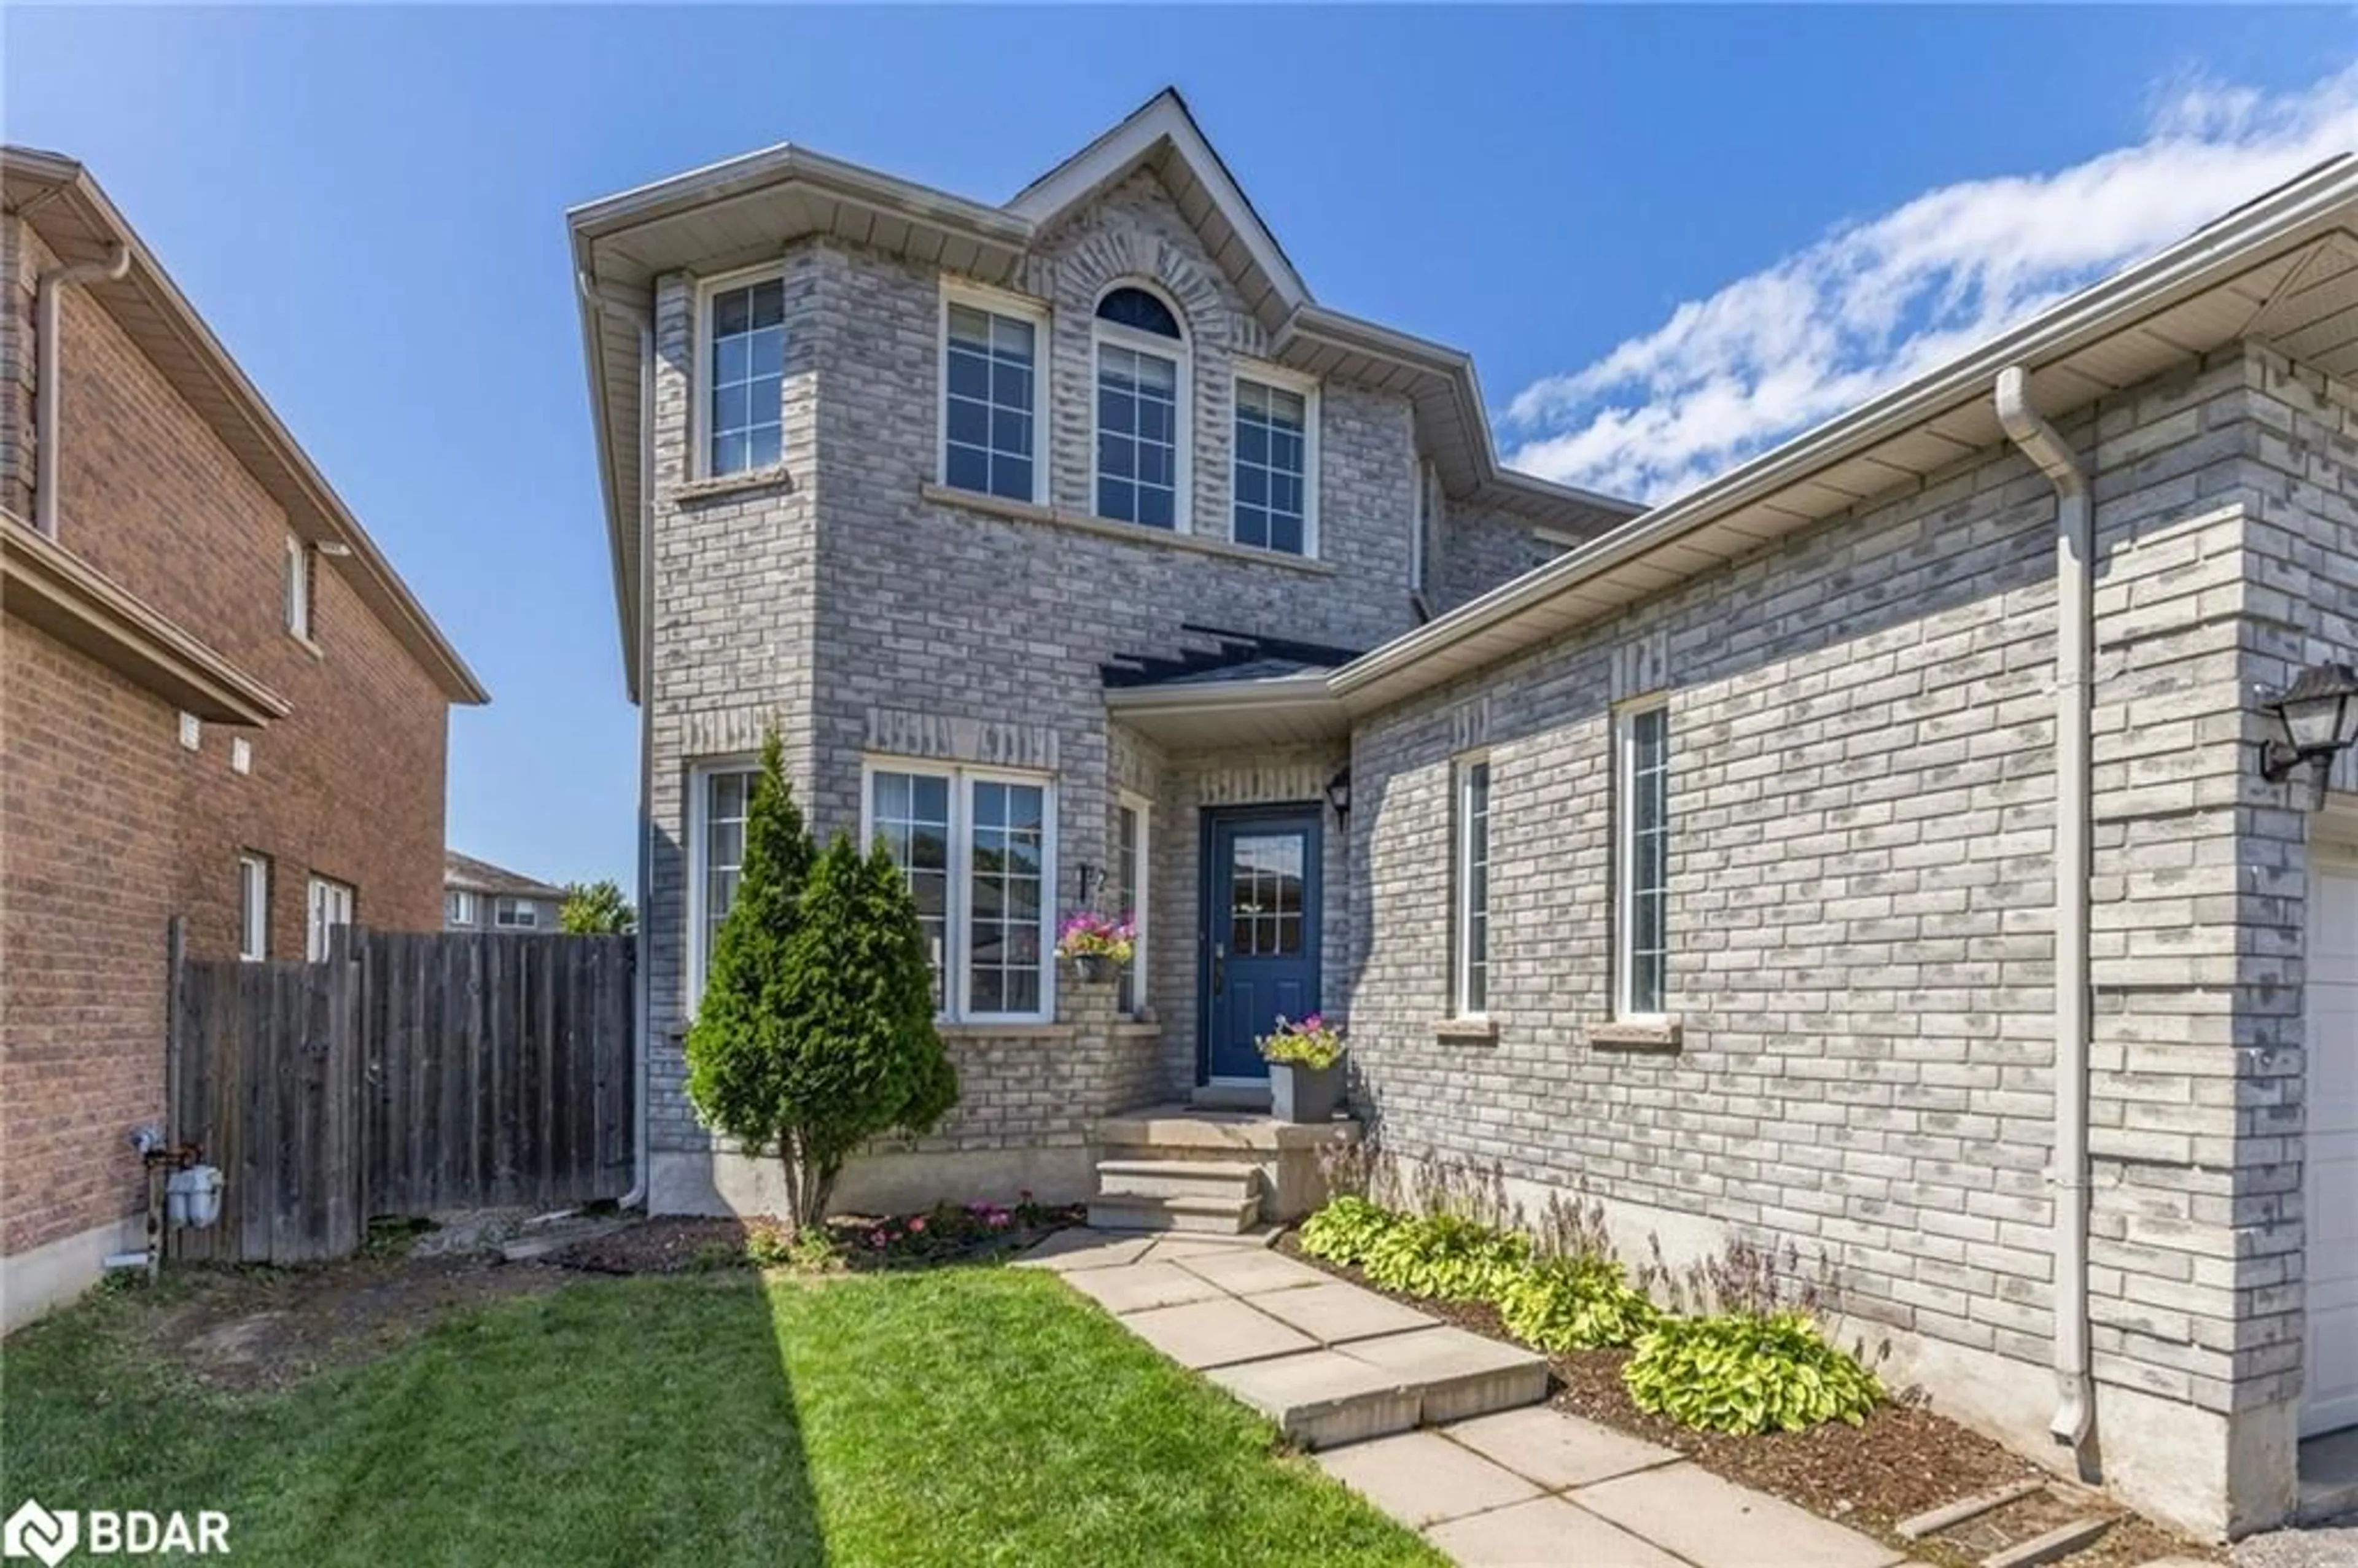 Home with brick exterior material for 270 Country Lane, Barrie Ontario L4N 0Y3